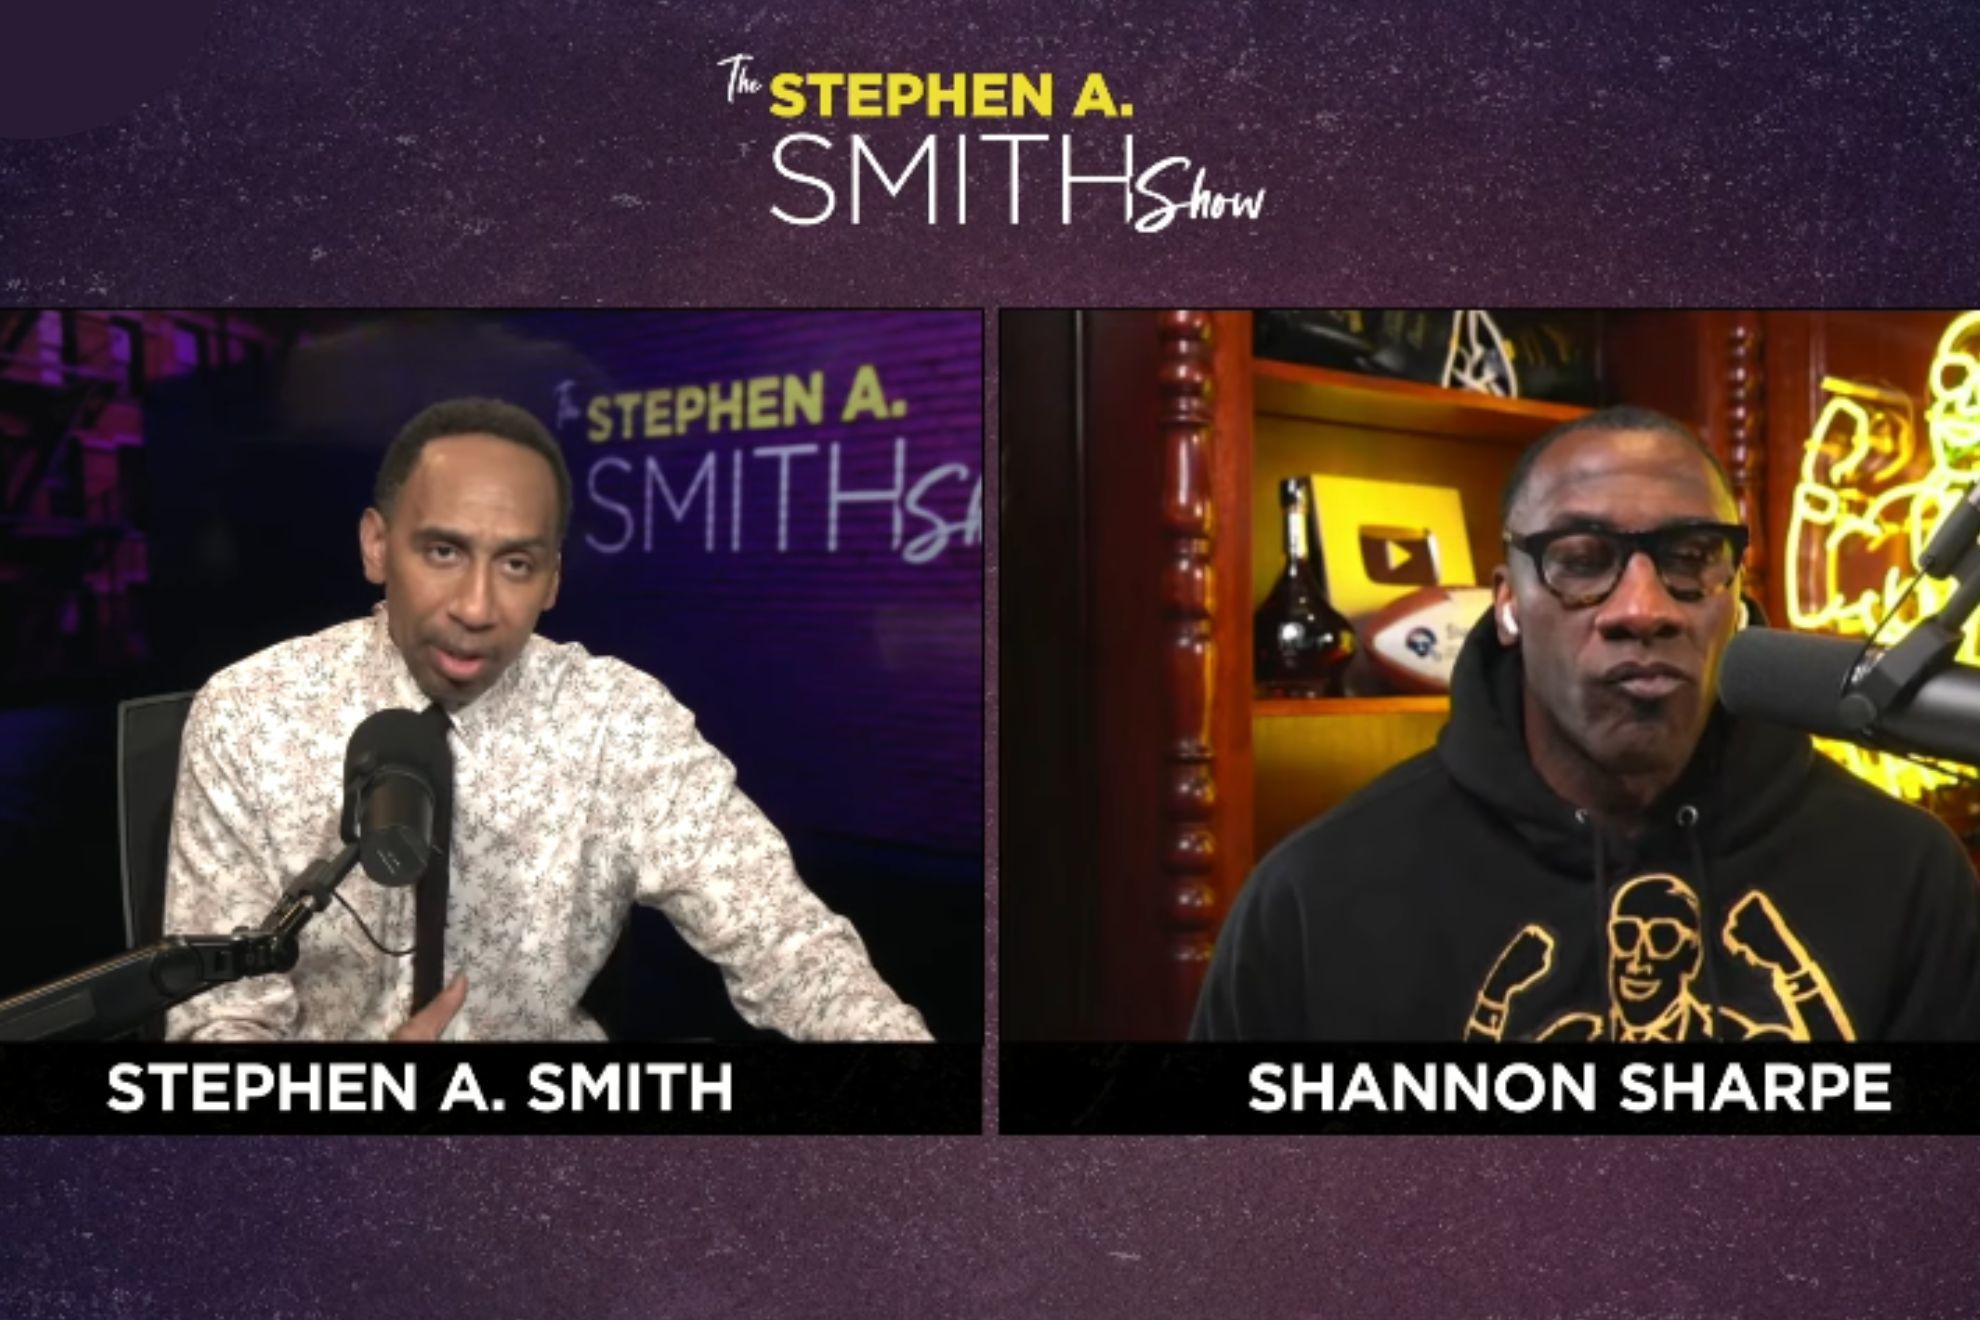 Shannon Sharpe throws Skip Bayless under the bus on The Stephen A. Smith Show